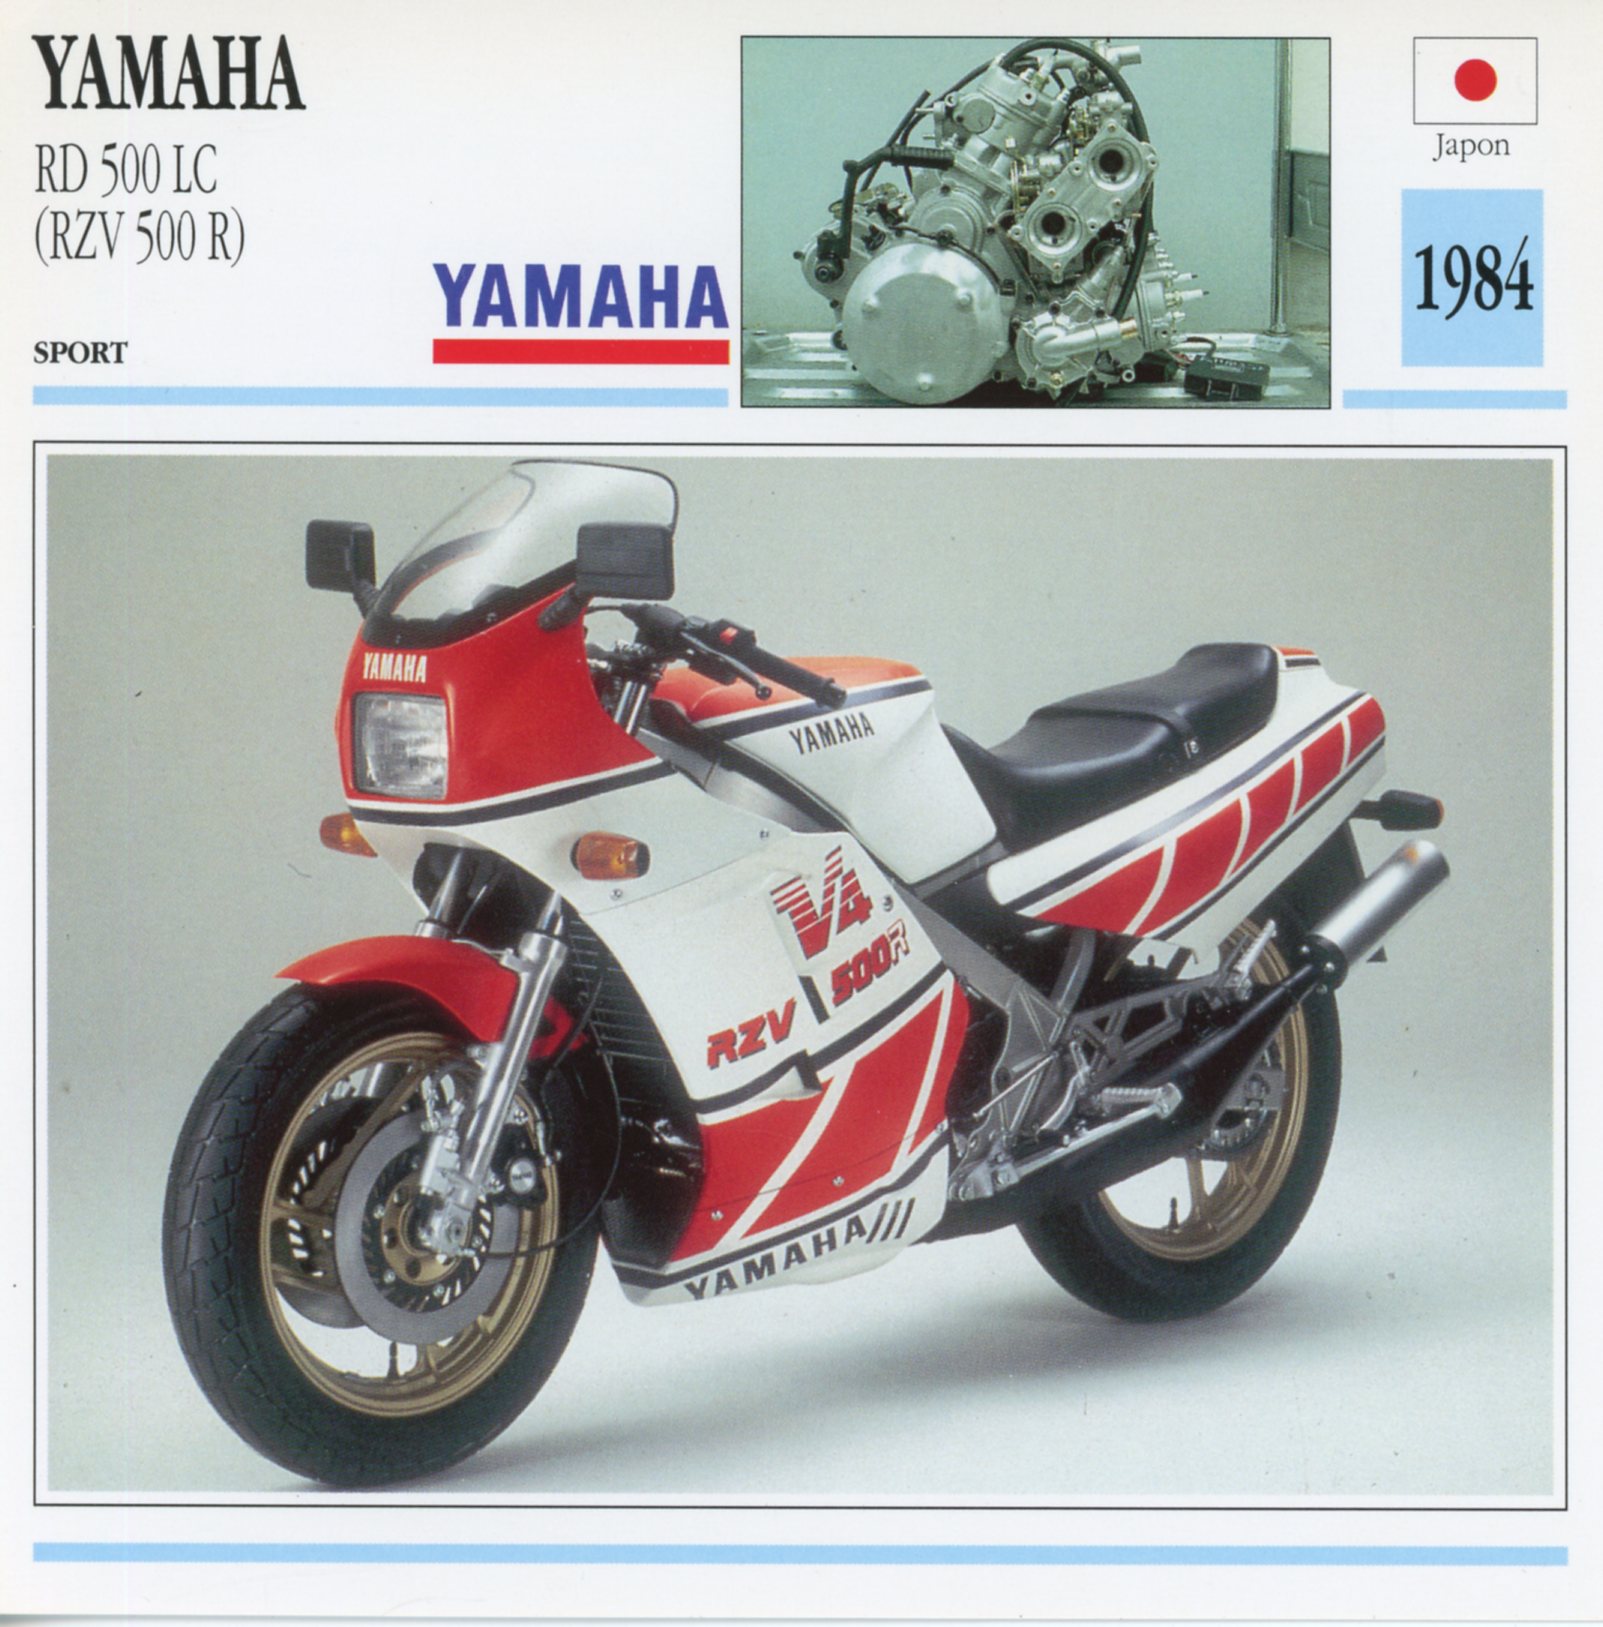 FICHE-MOTO-YAMAHA-RD-RD500-RD500LC-lemasterbrockers-Fiche-Technique-Moto- Motorcycle-Card